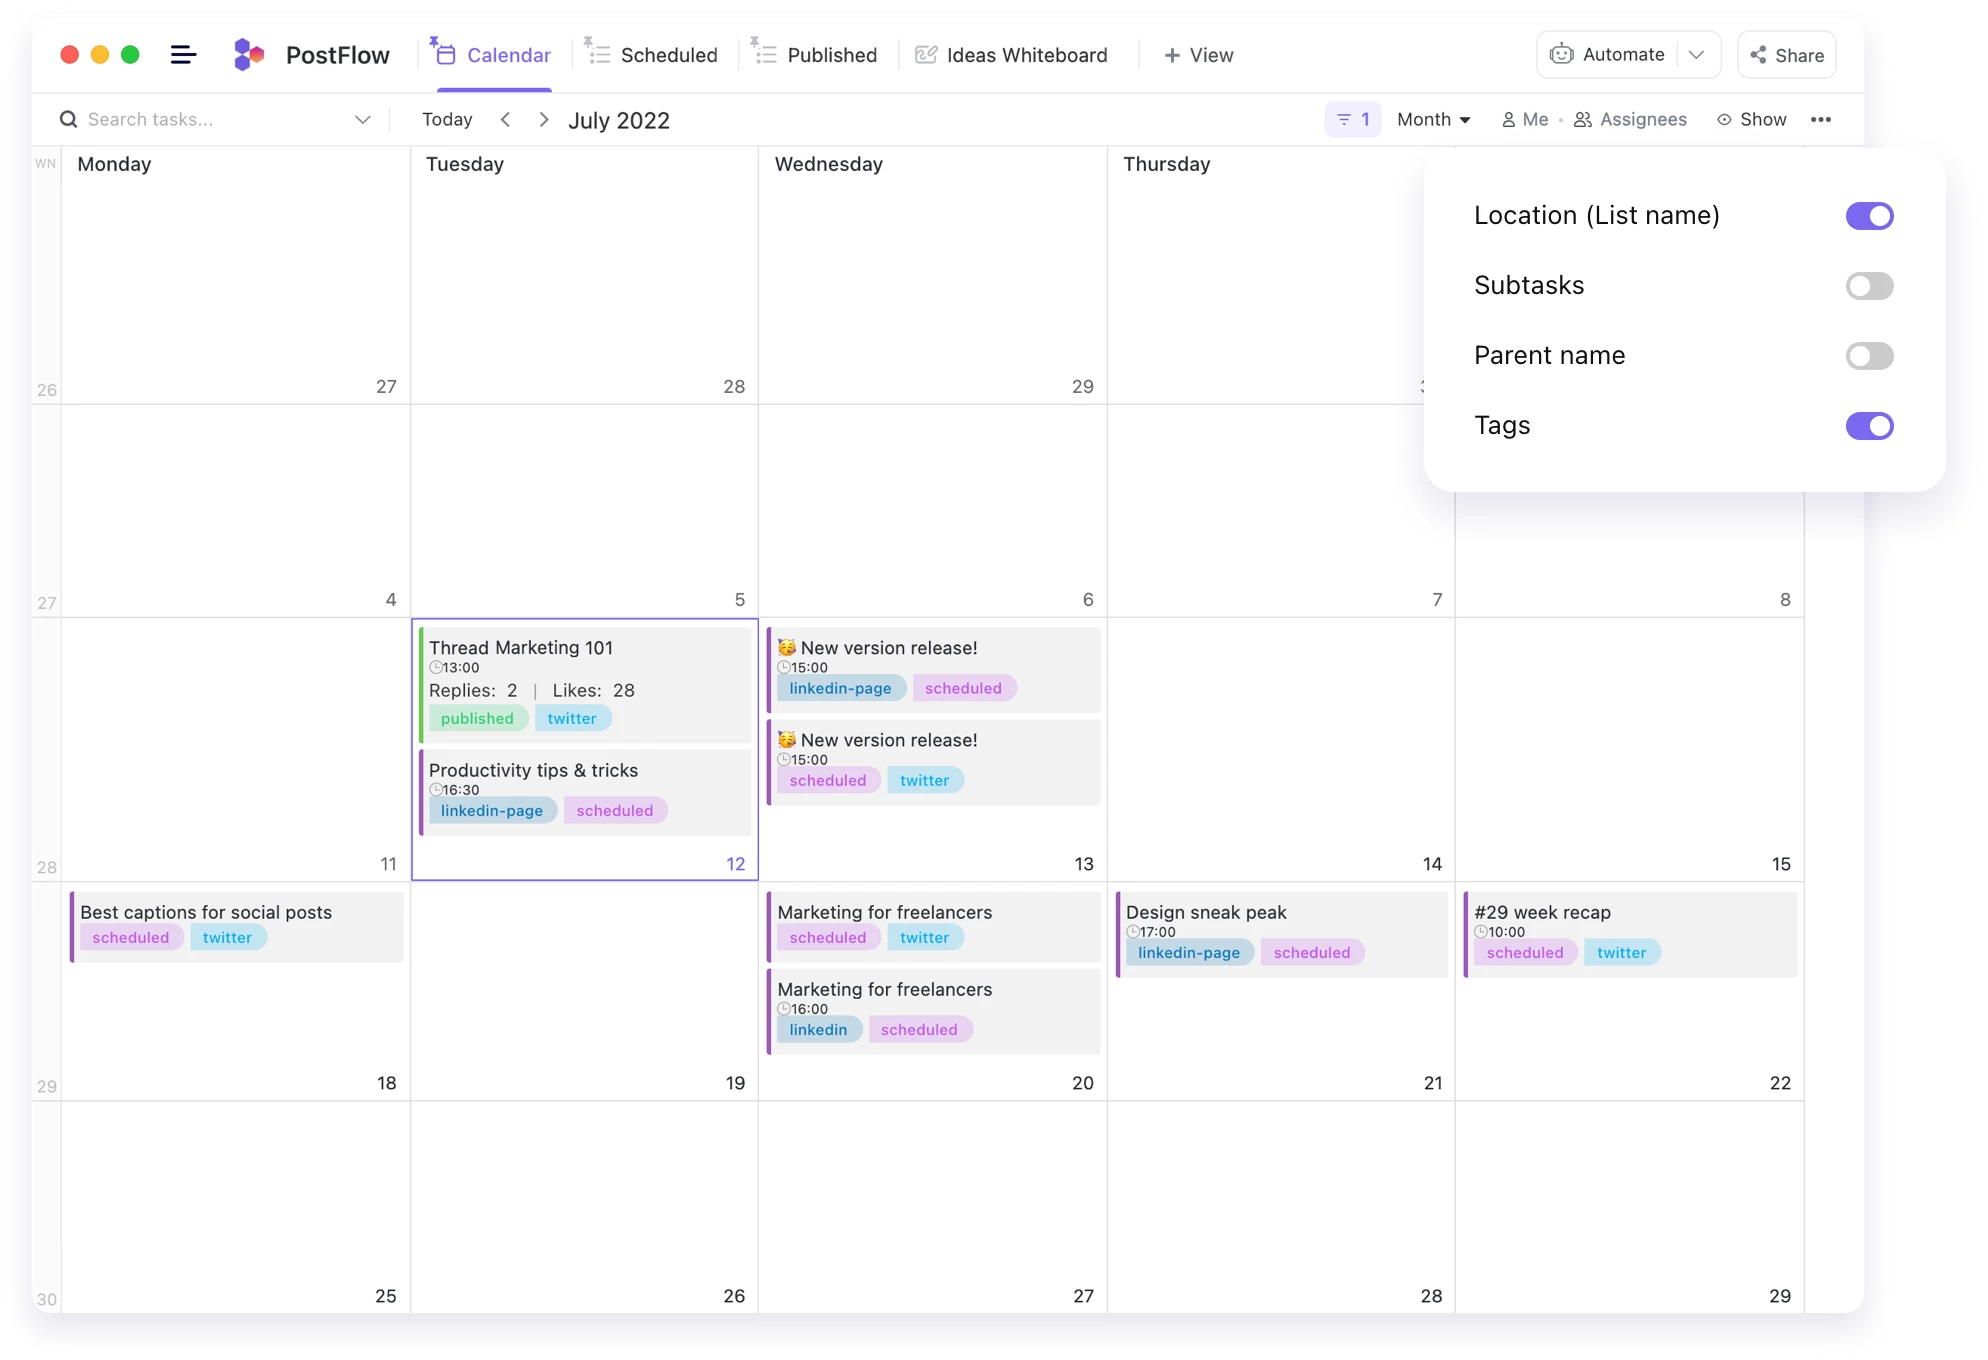 Calendar with scheduled social media posts